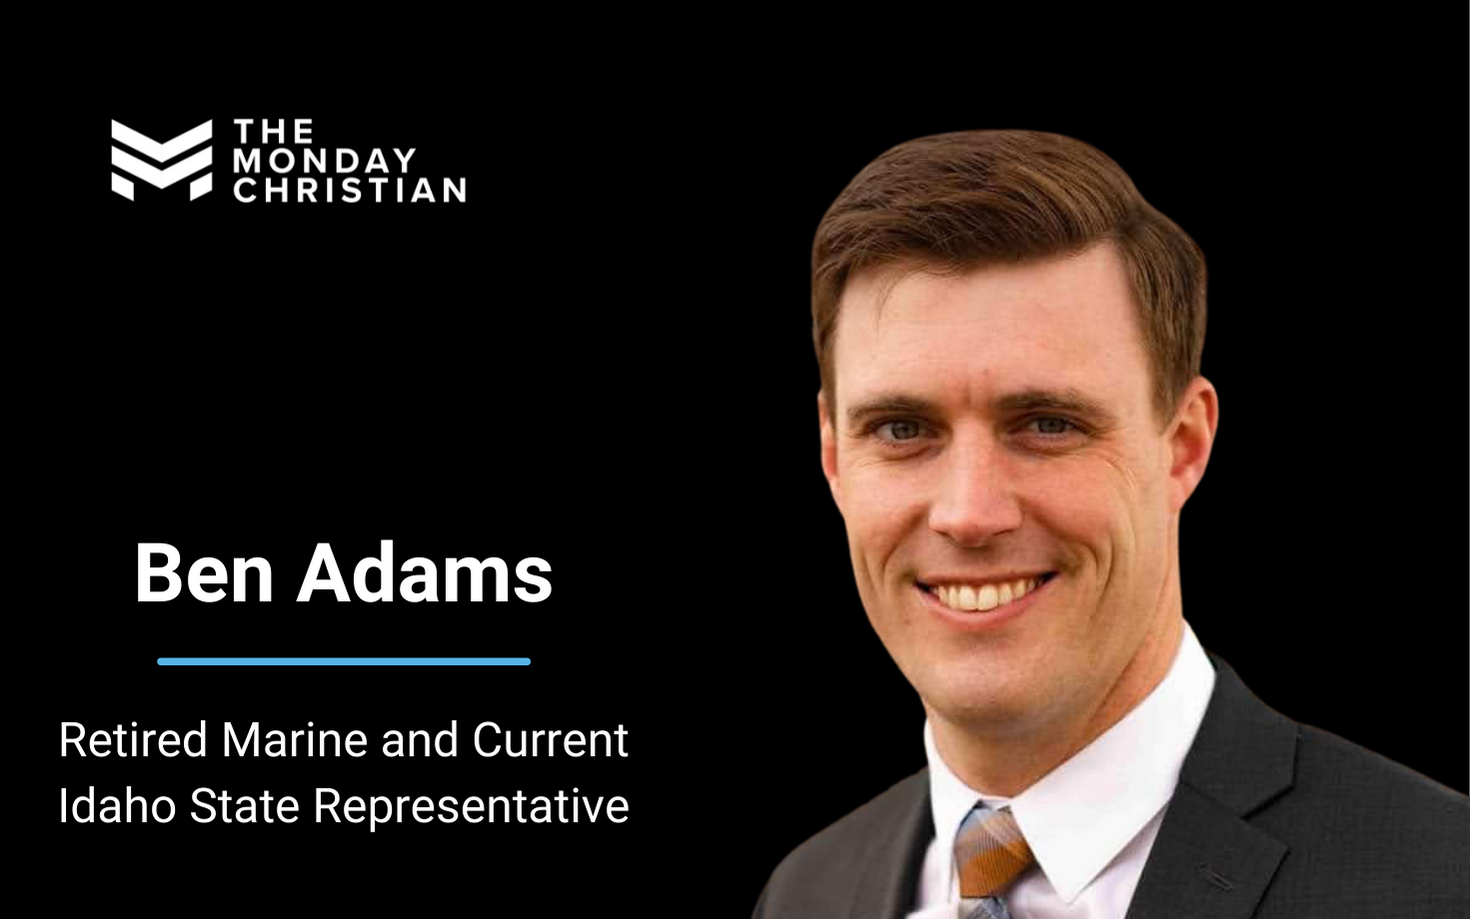 TMCP 115: Ben Adams on How to Find God Again When You Feel Like You’ve Lost Him